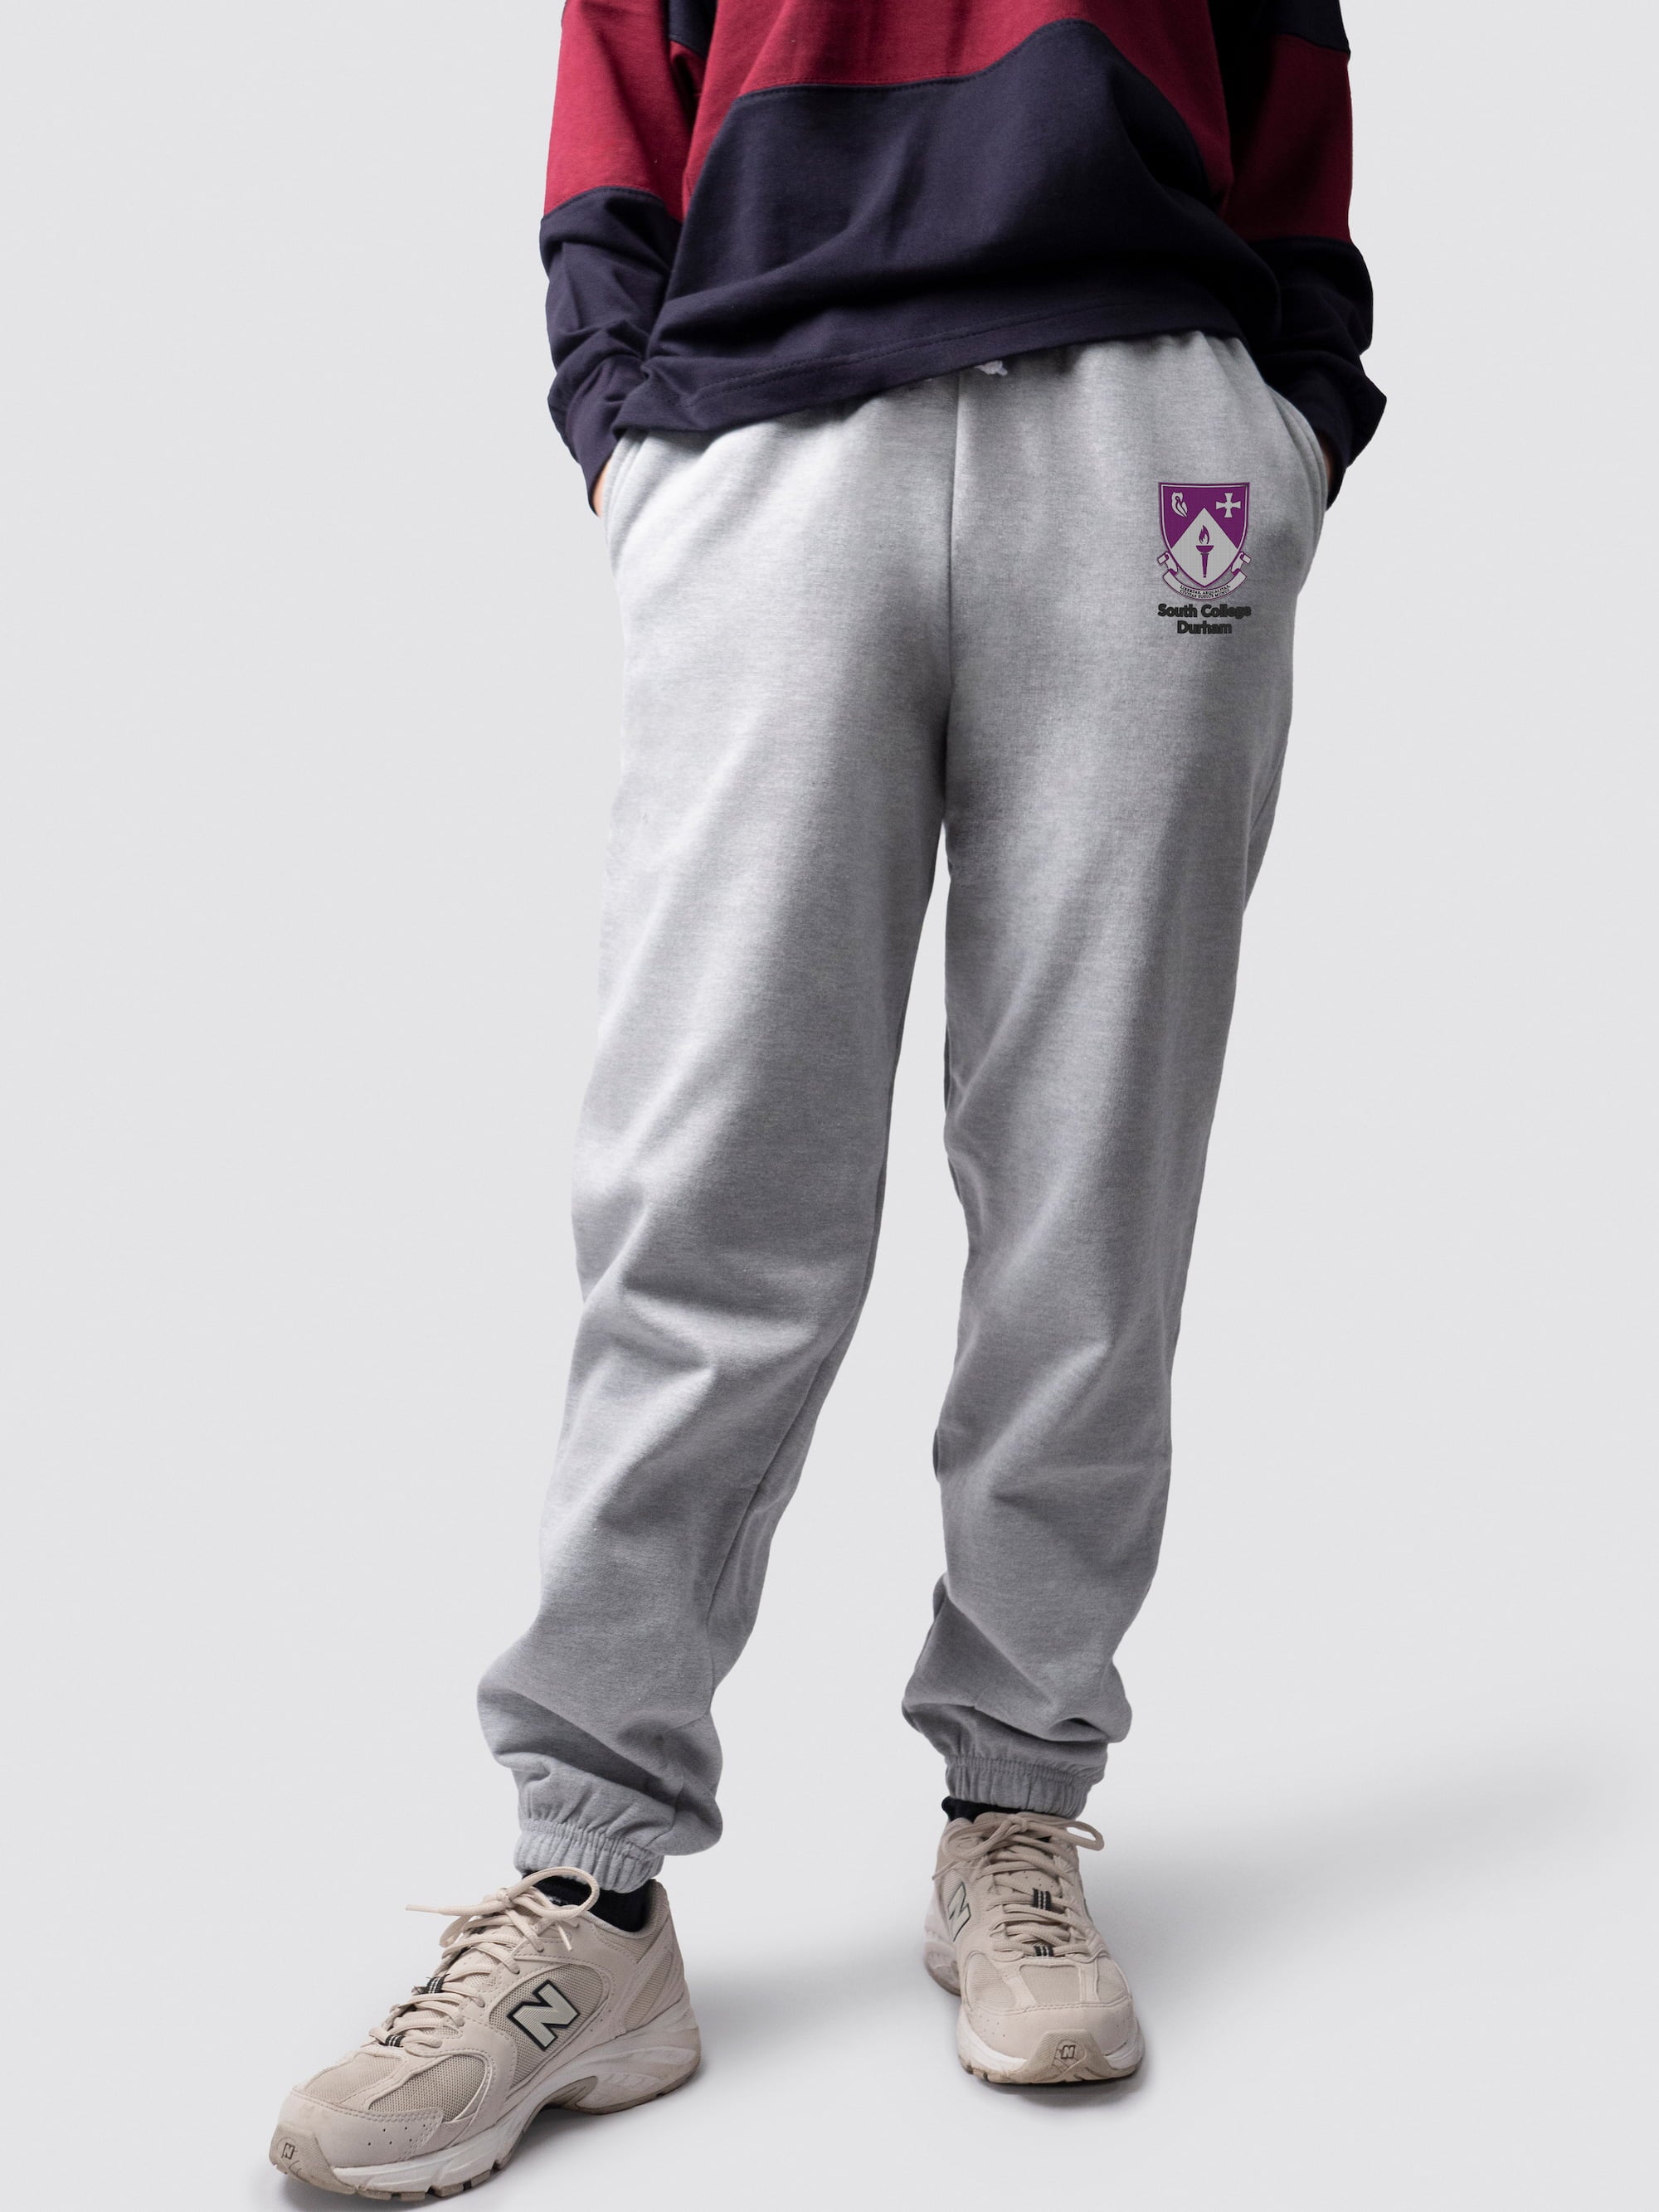 undergraduate cuffed sweatpants, made from soft cotton fabric, with South logo